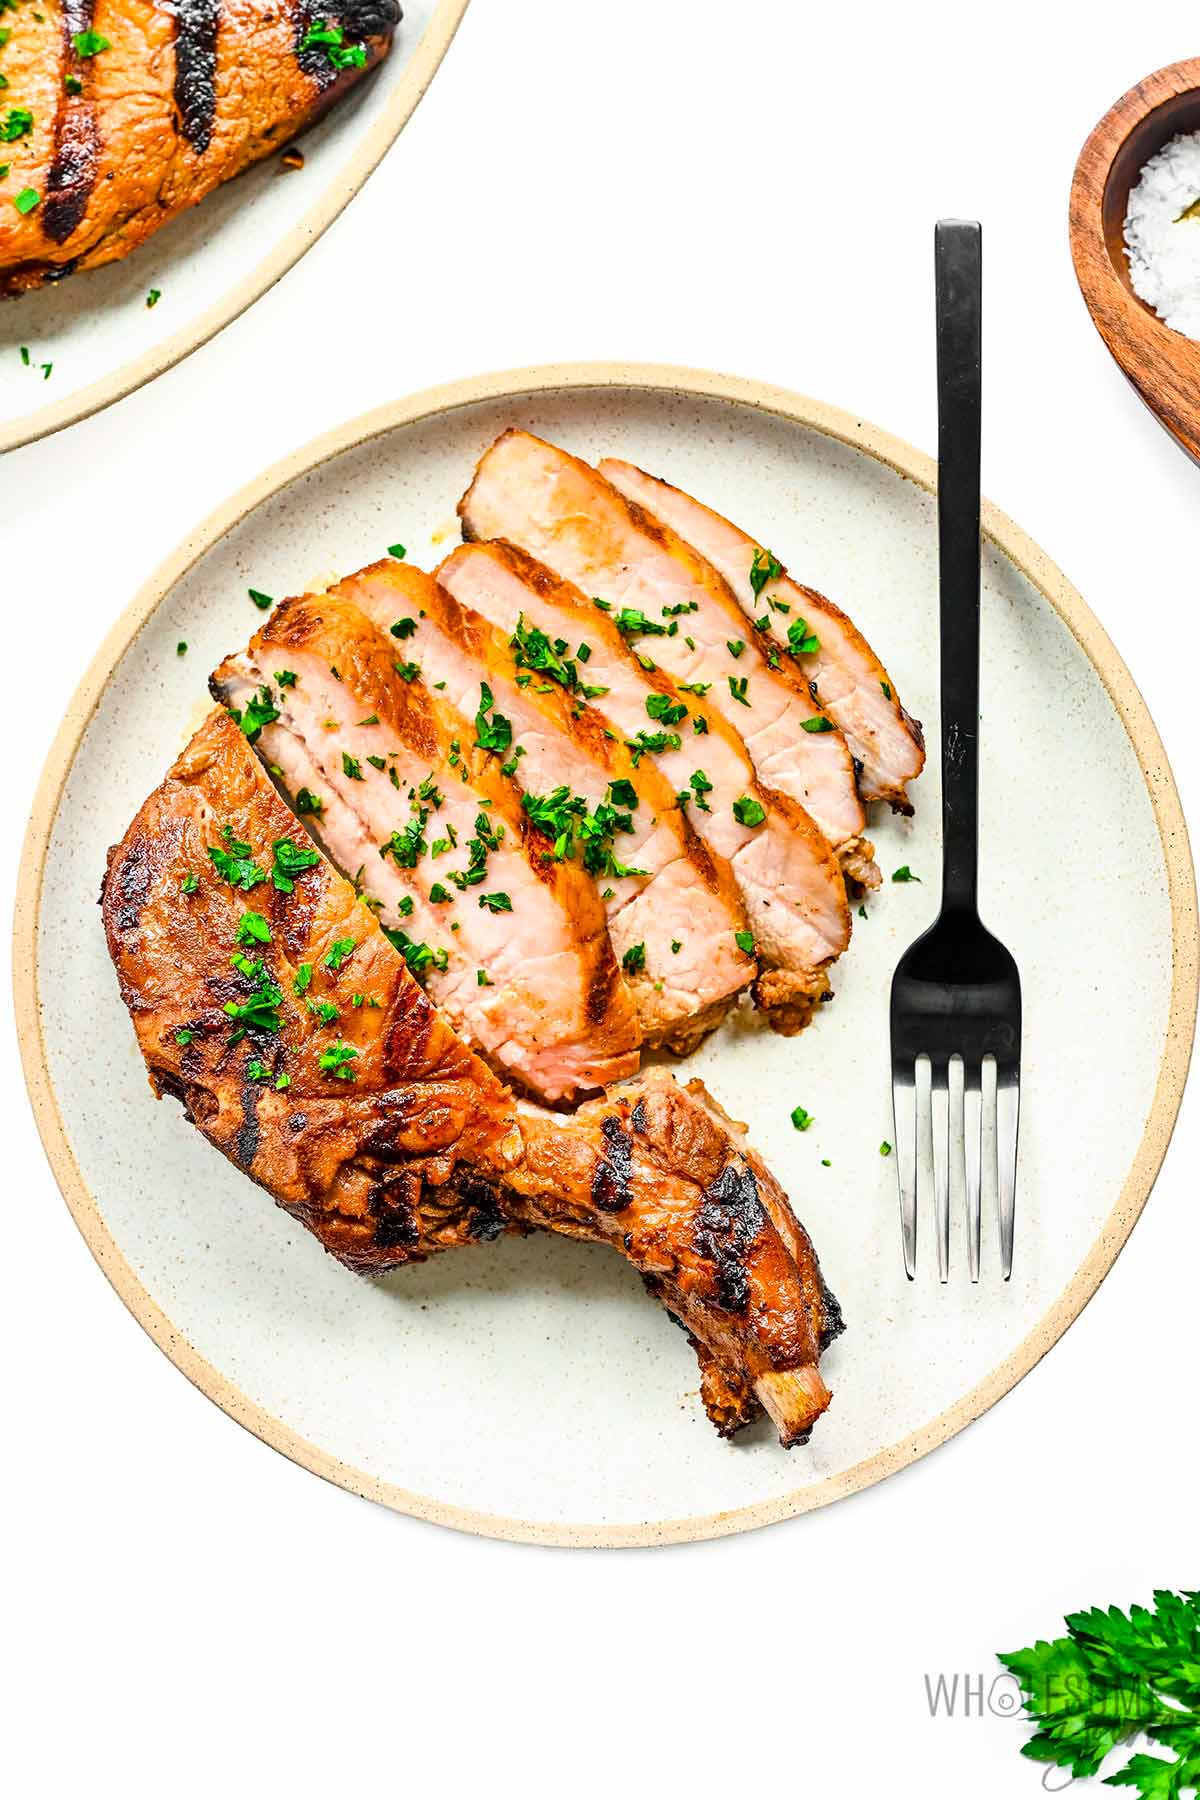 Pork chops sliced on a plate with a fork.